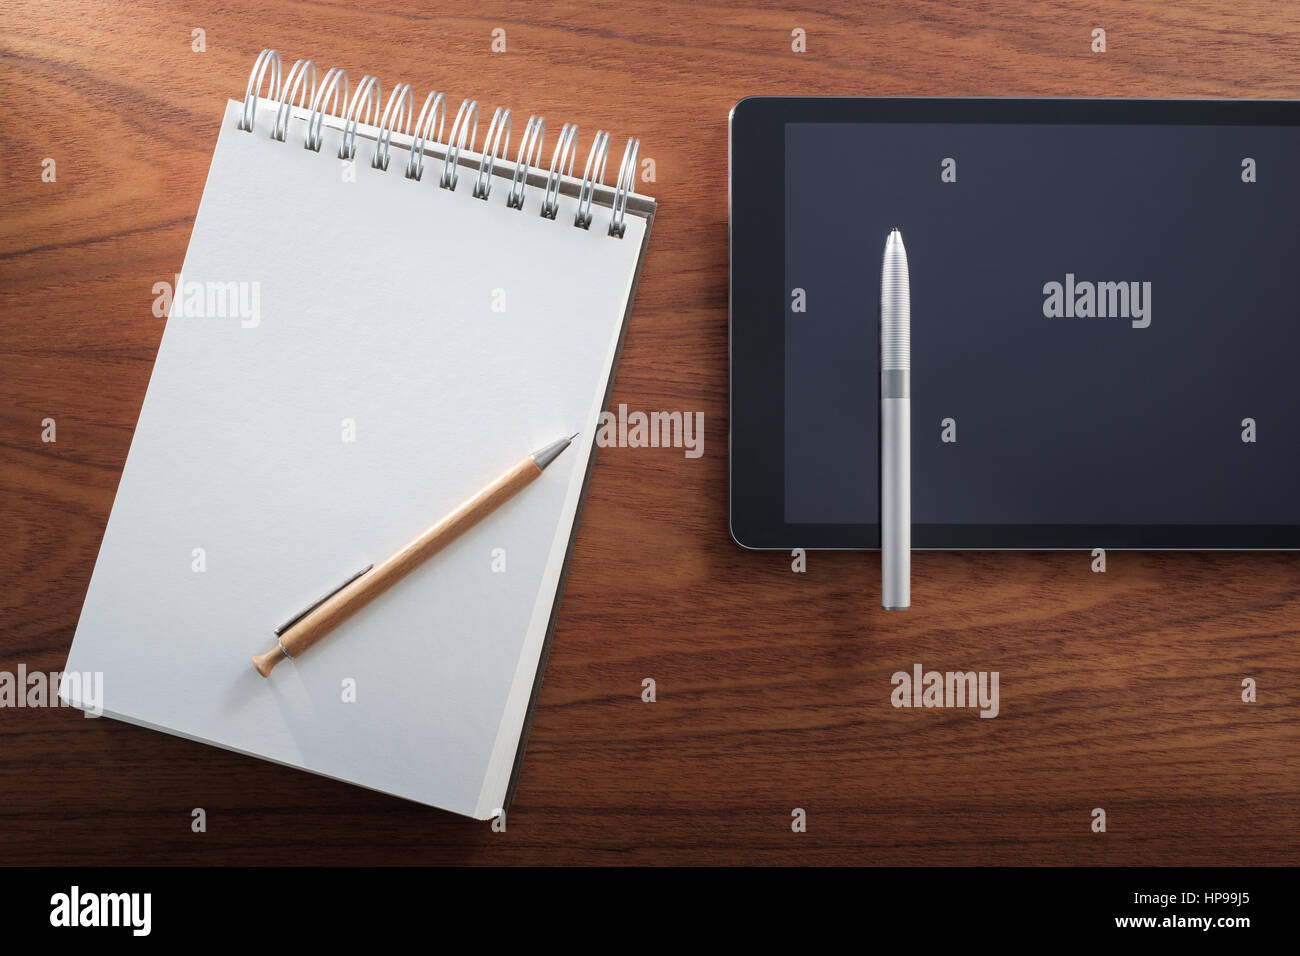 Stripped notepad and pencil vs tablet and digital pen. Analog and digital. Stock Photo